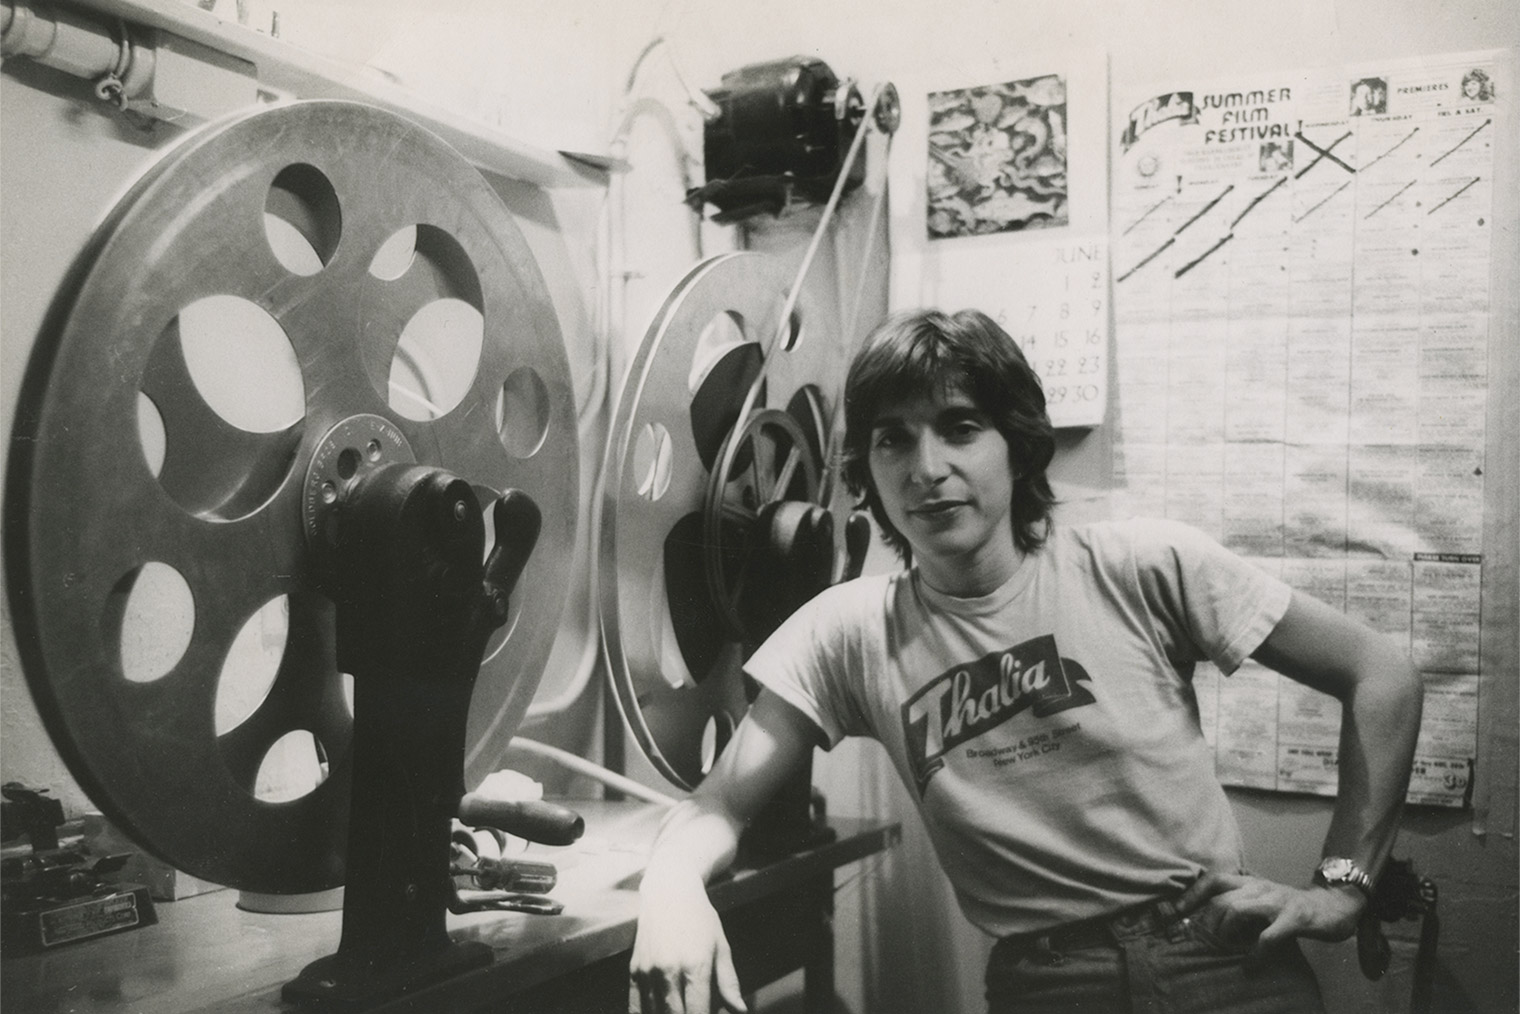 A black-and-white photograph of the author, Robin Schwalb, standing beside a rewinder at the Thalia Theater in New York City, circa 1978.